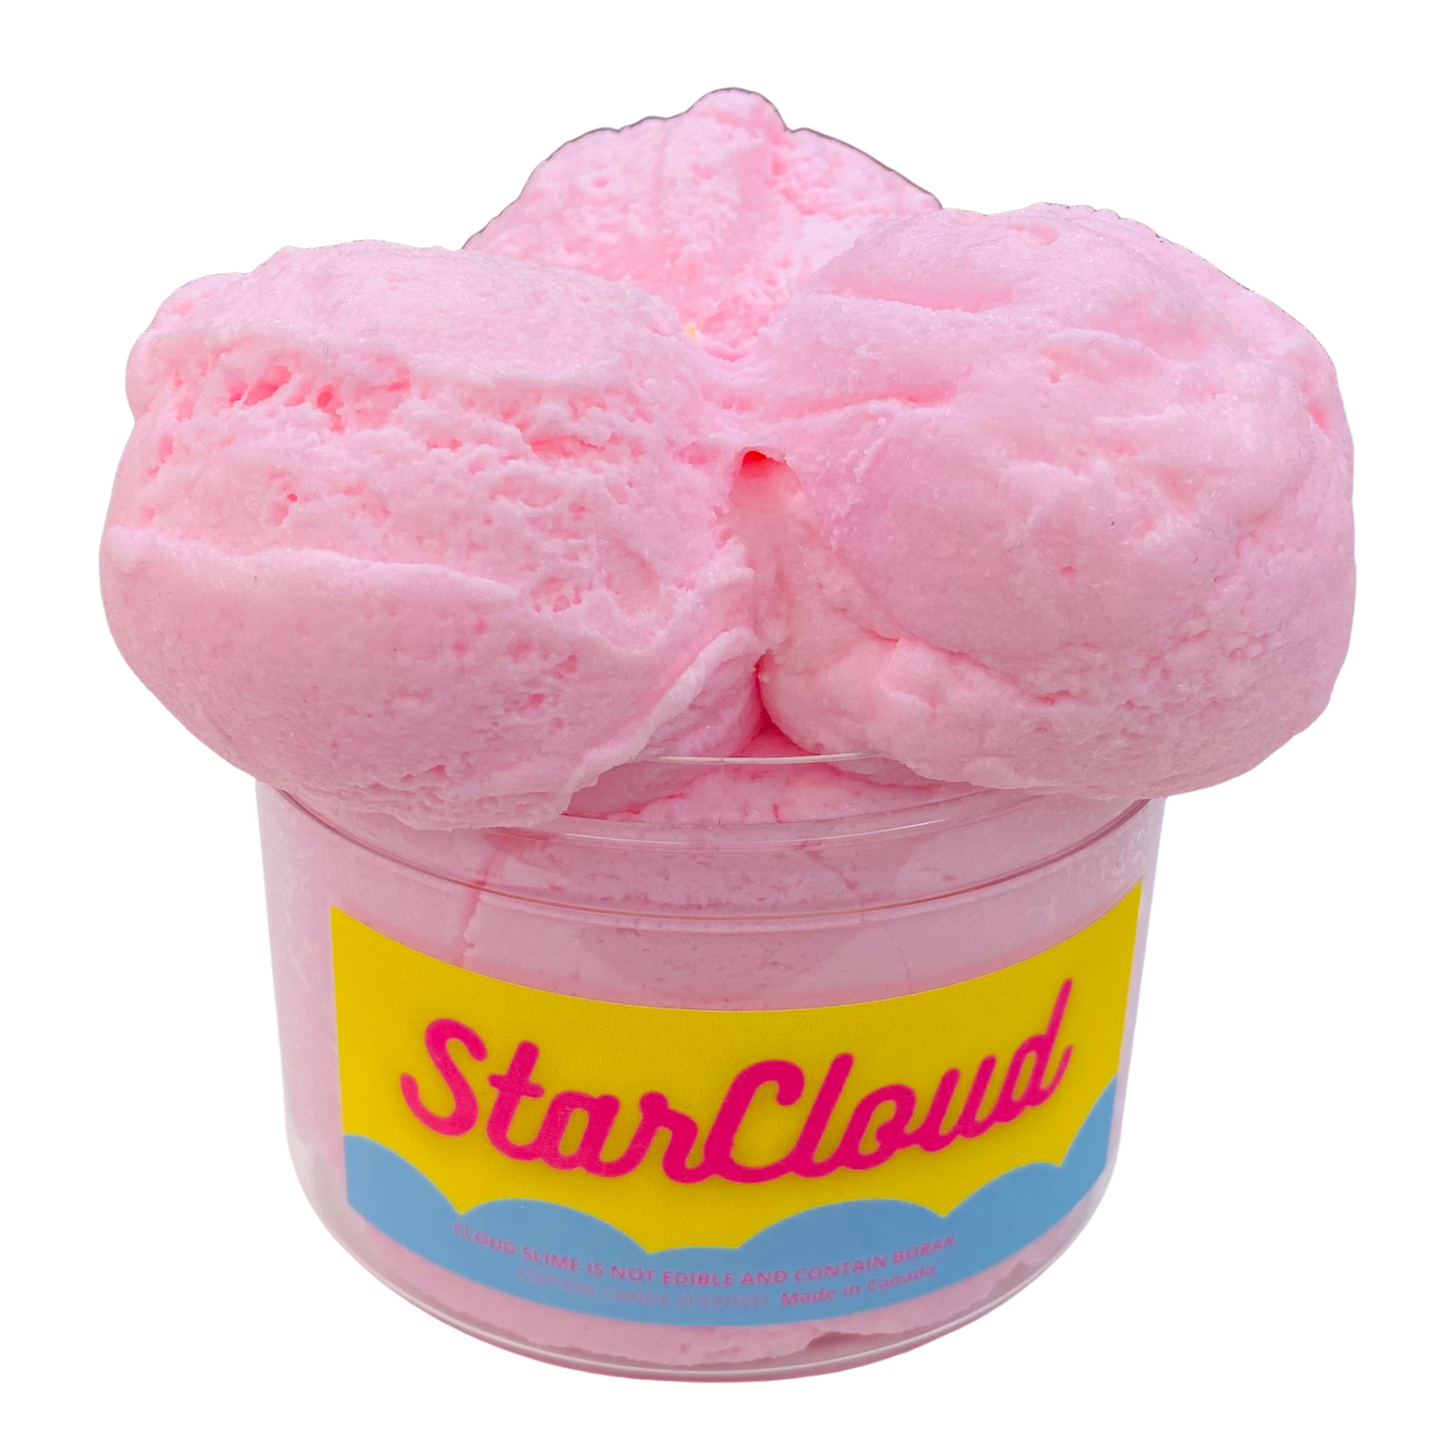 STAR CLOUD COTTON CANDY